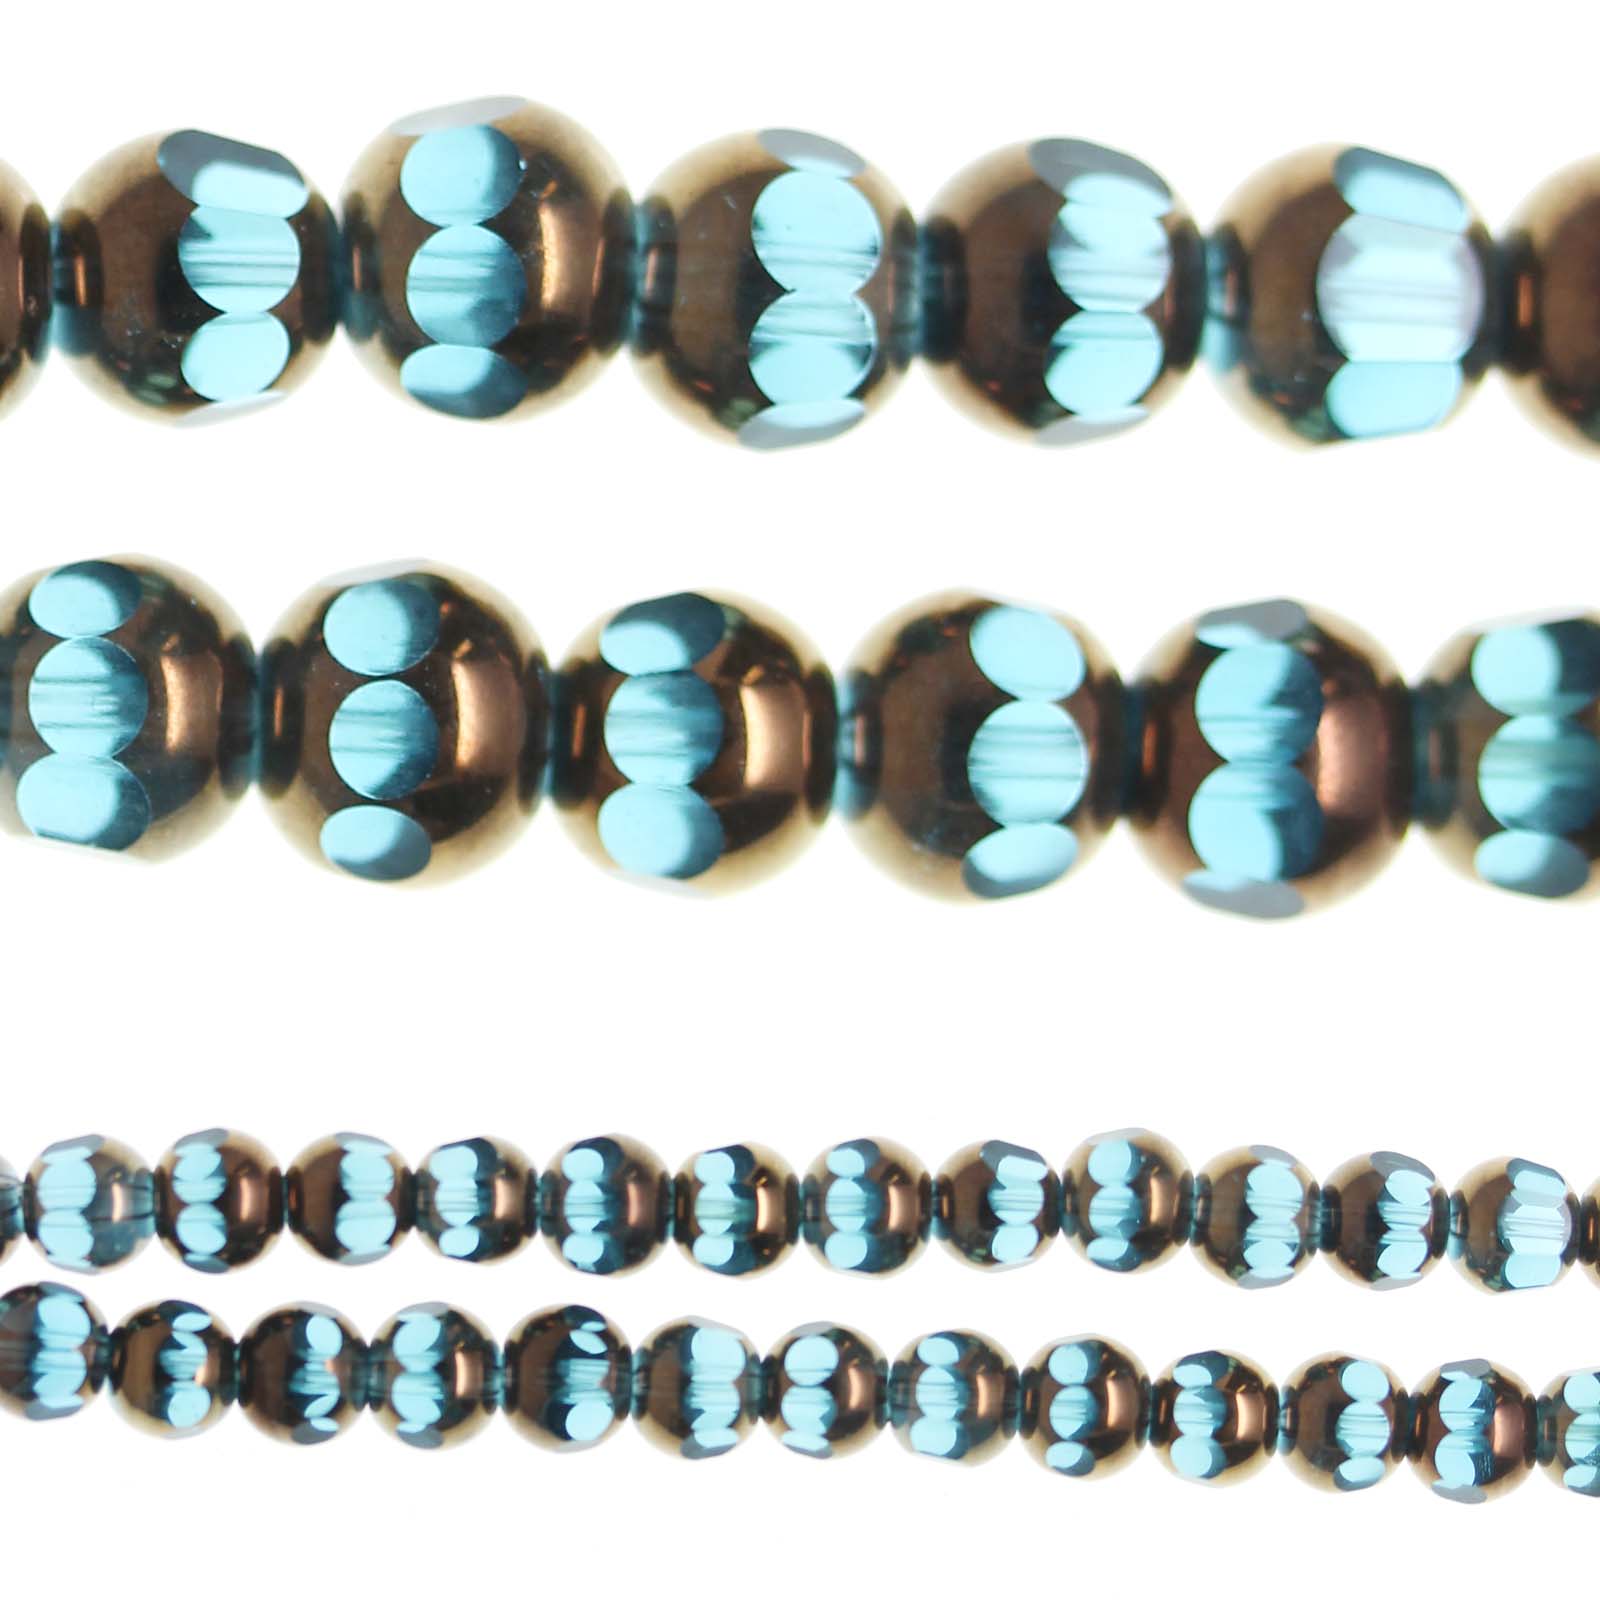 Buy the Bead Gallery® Glass Beads, Aqua & Copper at Michaels